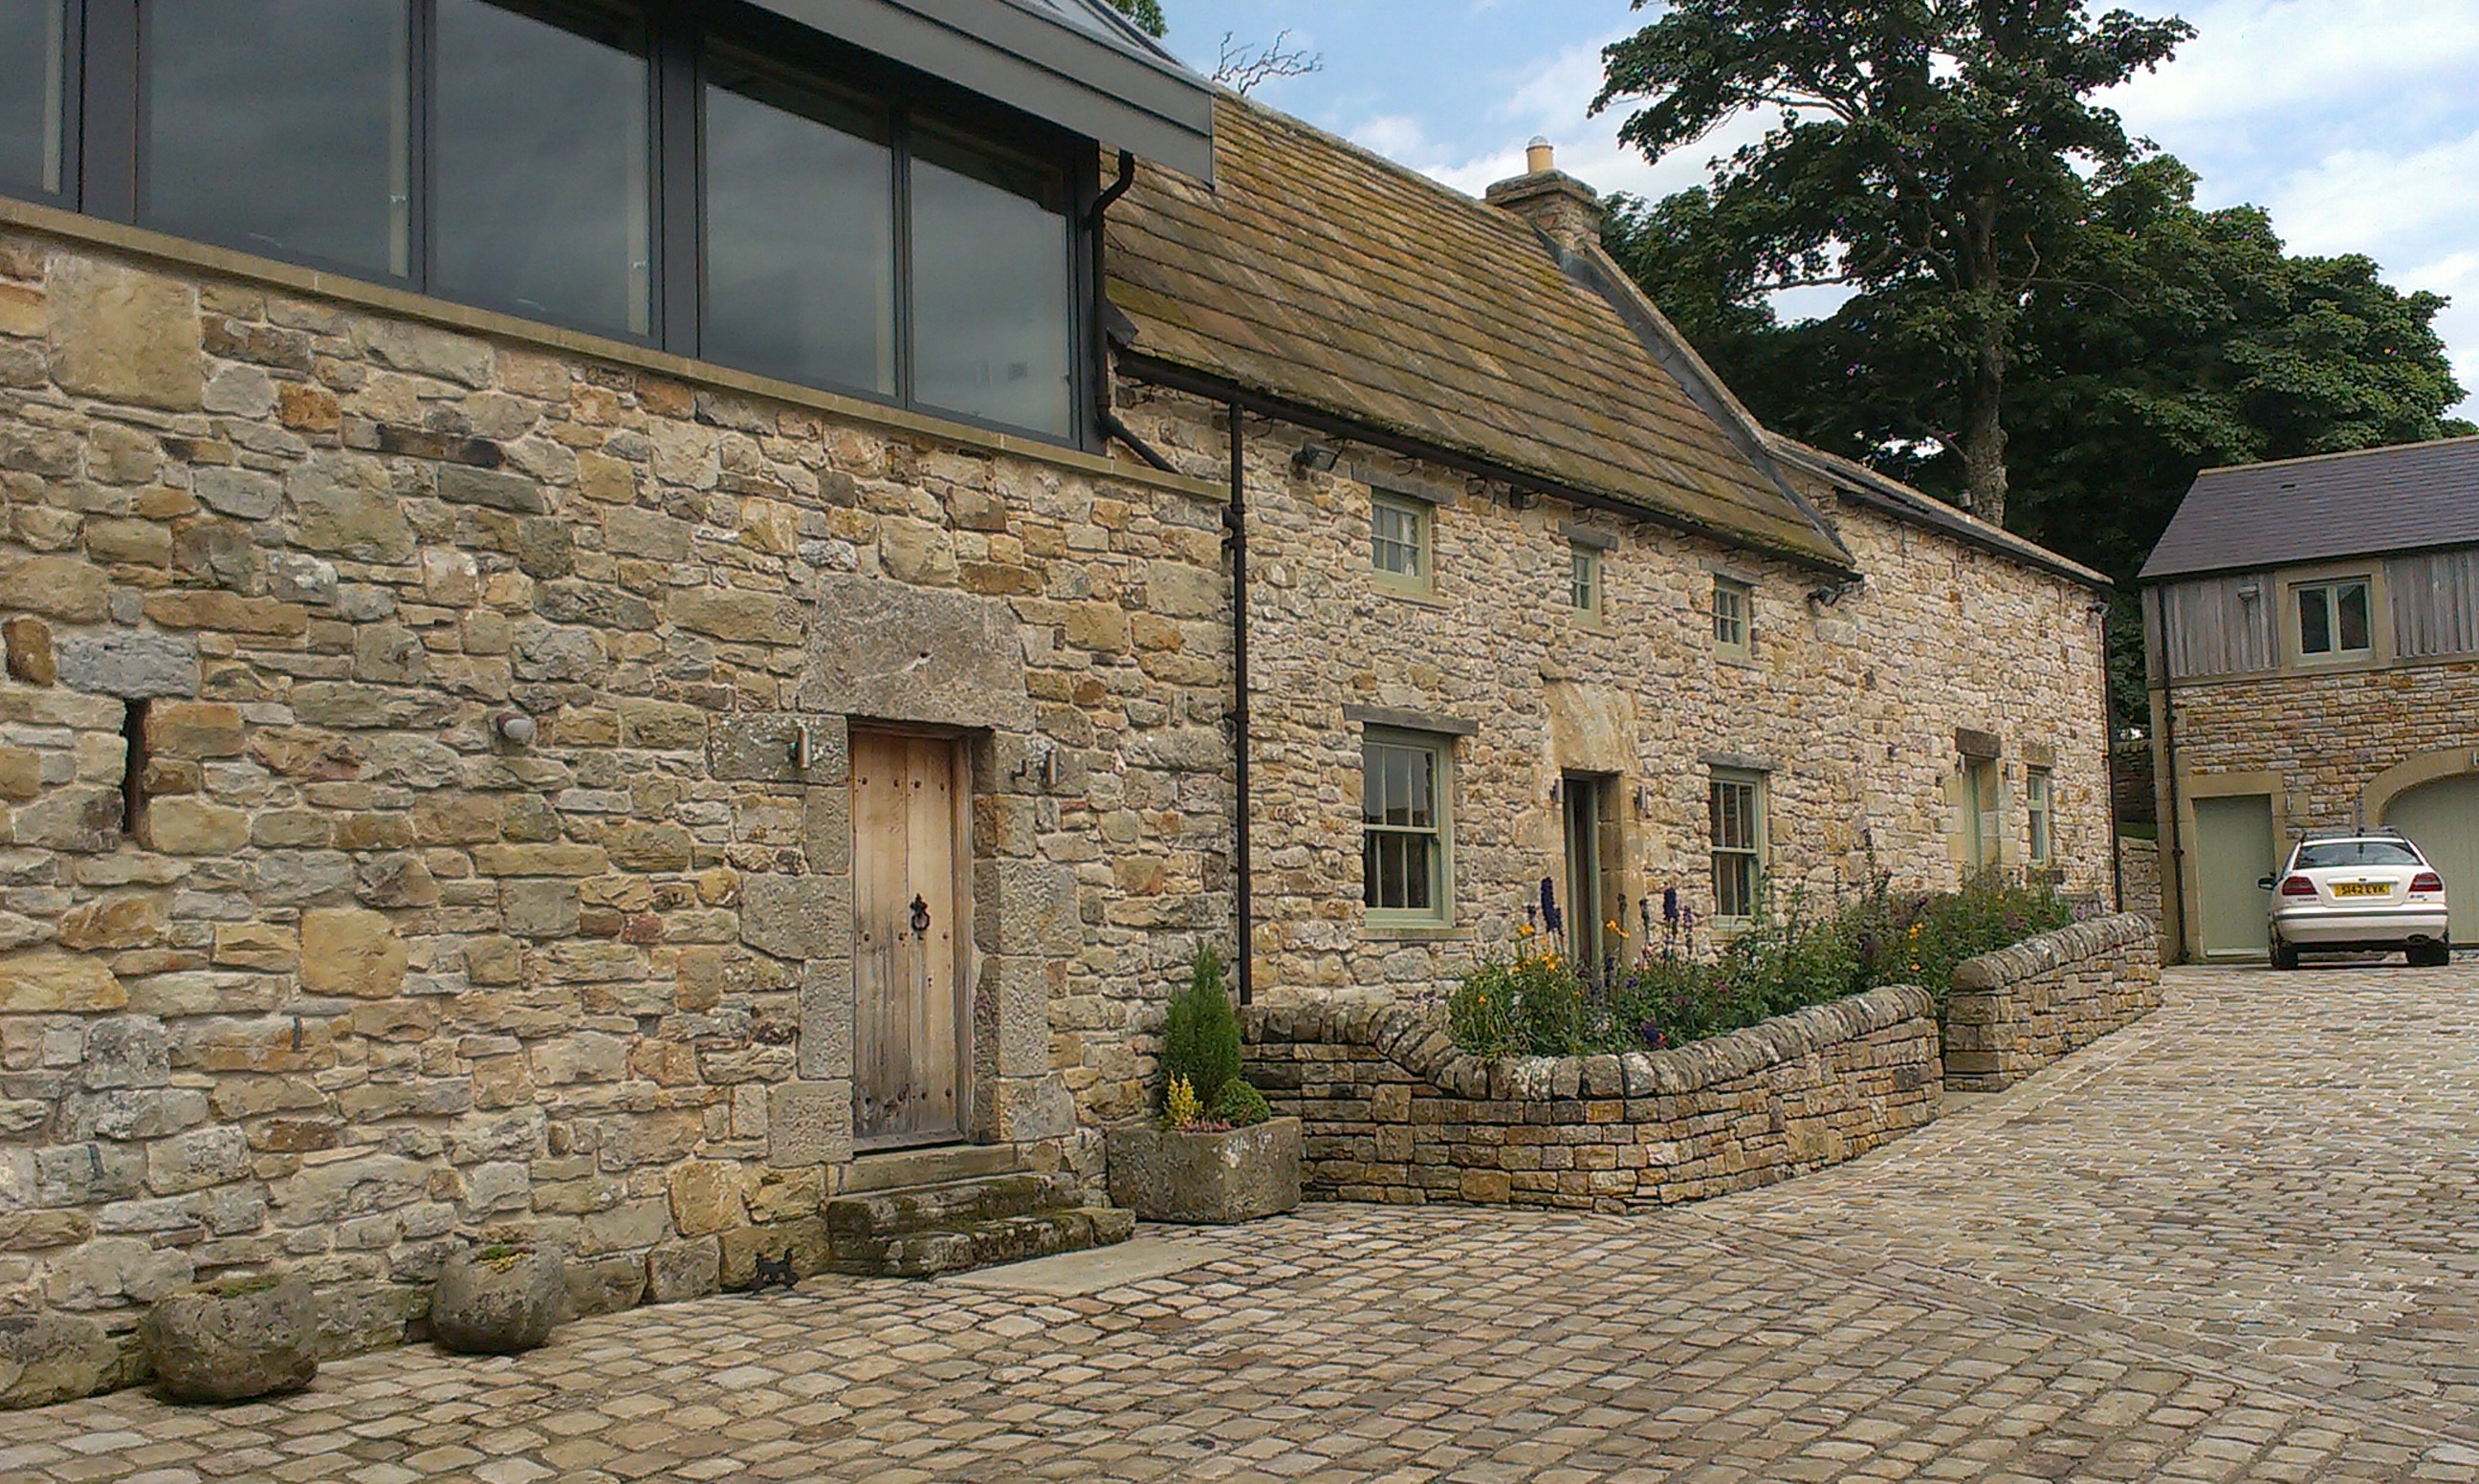 Stone farm building conversion and cobbled foreground.